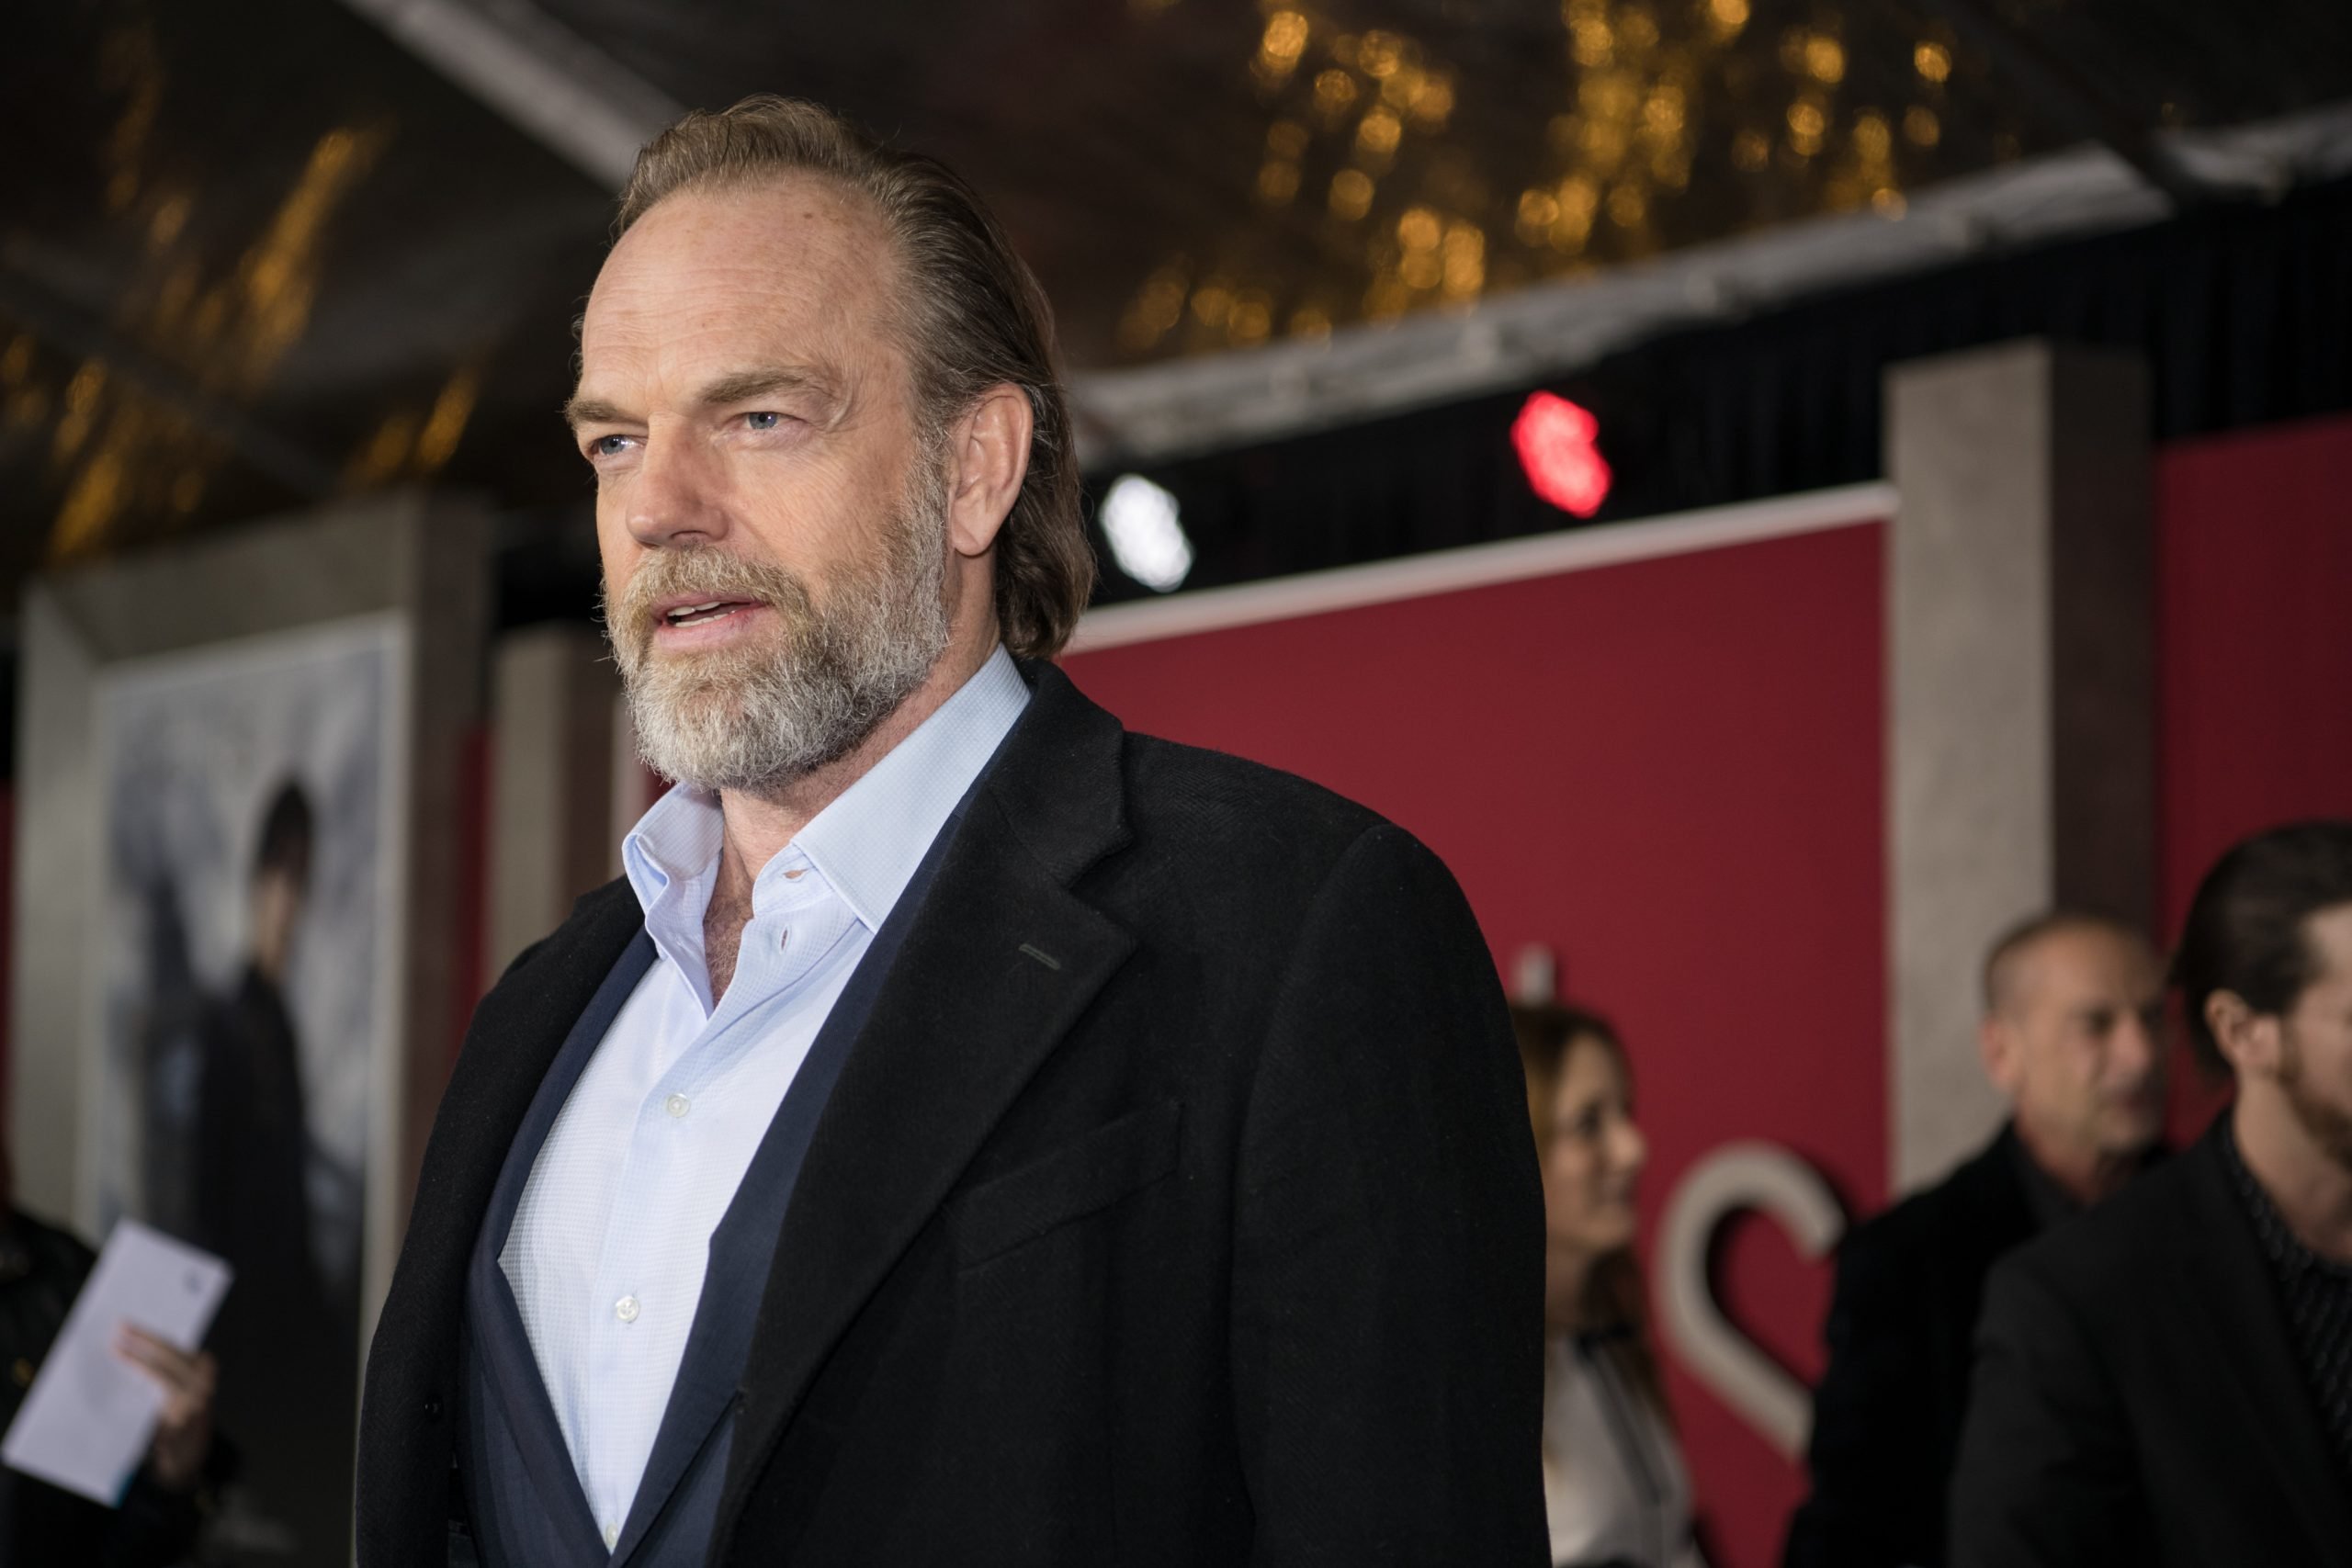 Hugo Weaving on 'The Lord of the Rings' and 'Measure for Measure